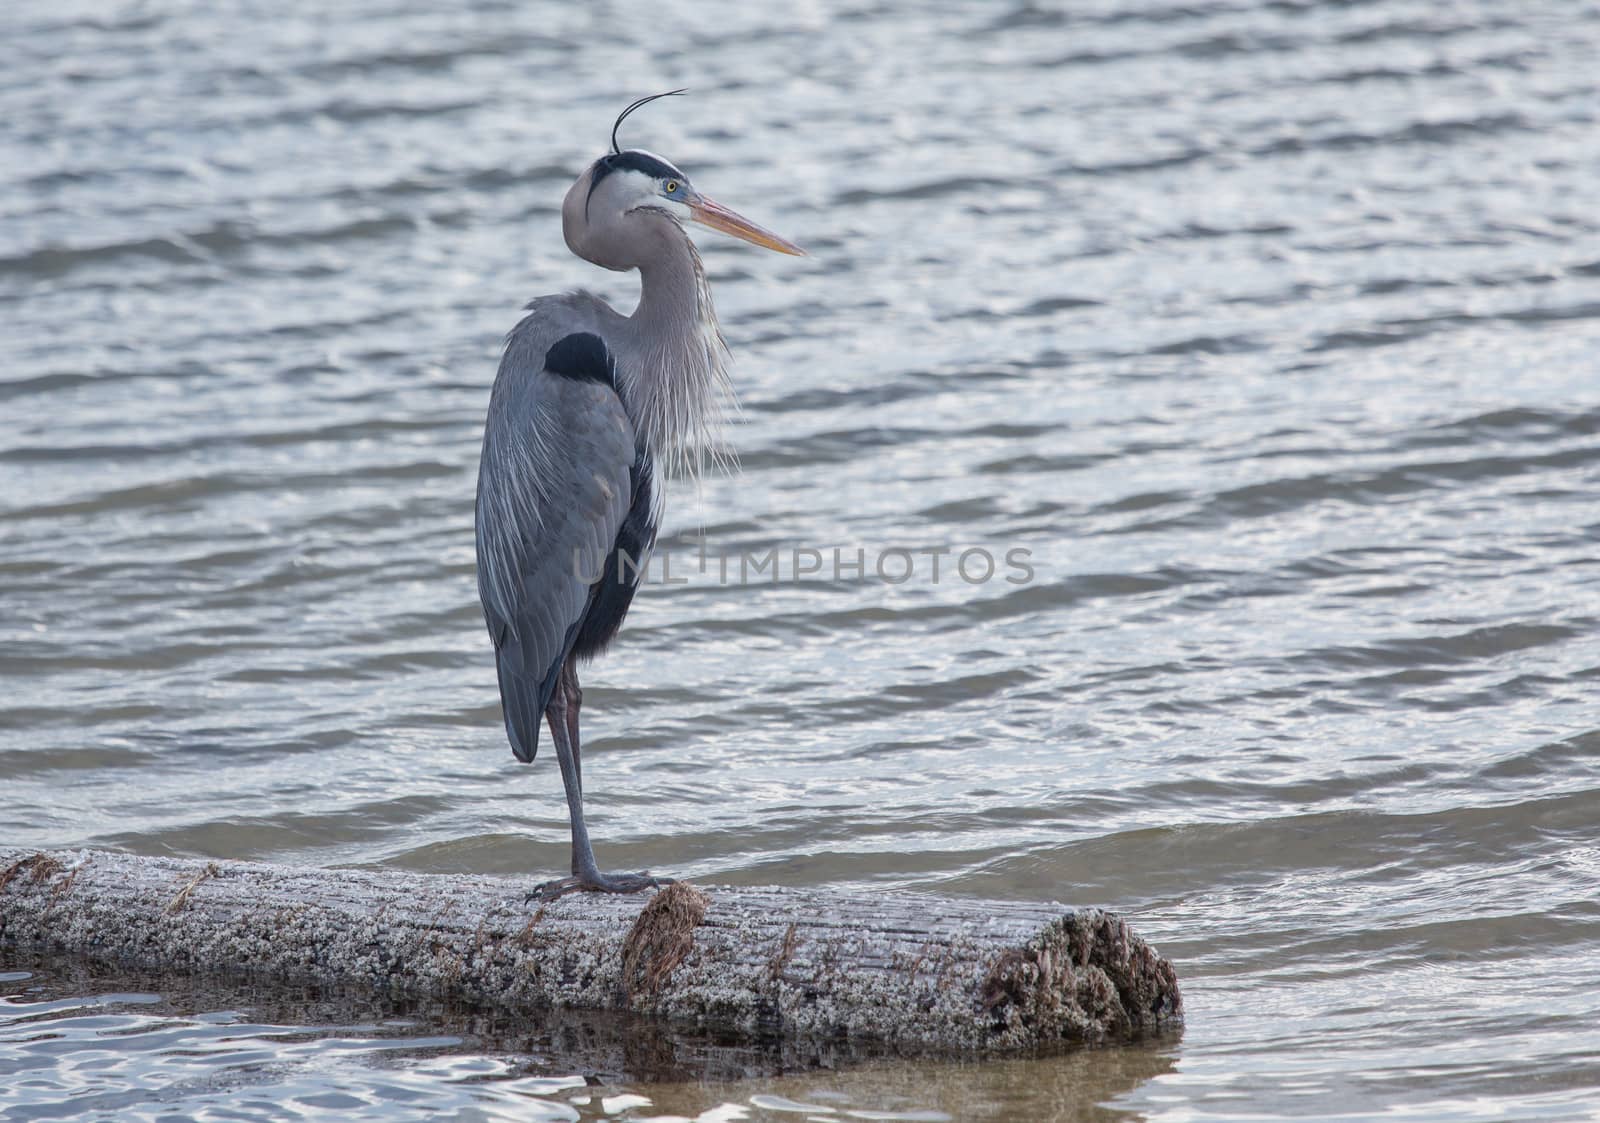 This Great Blue Heron is staring out over the waters and appears to be deep in thought.